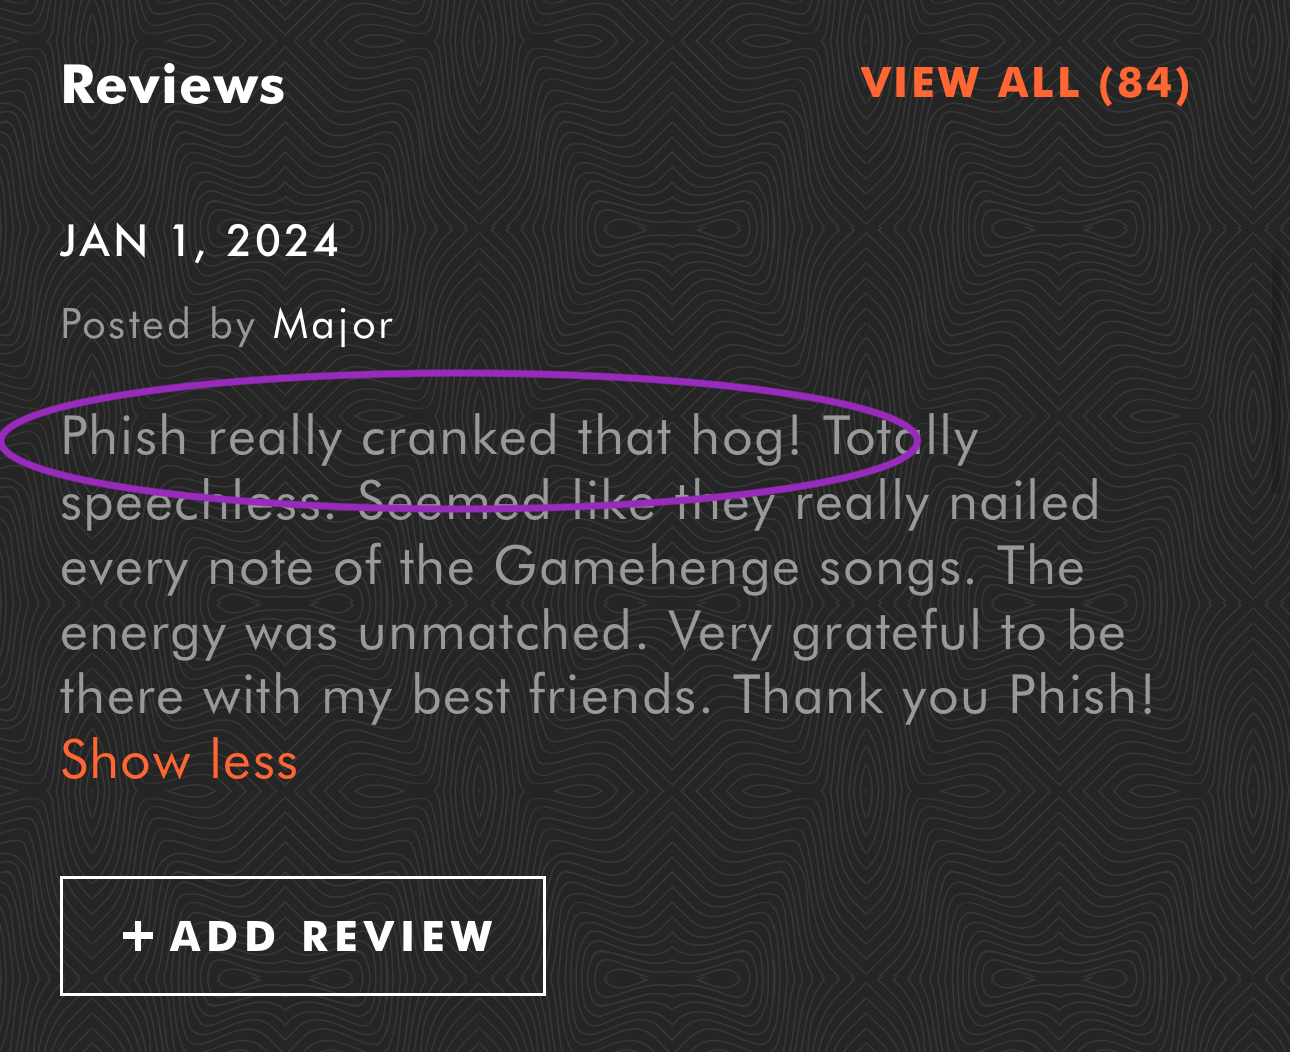 The image shows a screenshot of a section titled “Reviews” with the option to “VIEW ALL (84)” reviews. It includes a highlighted review posted on “JAN 1, 2024” by someone named “Major.” 